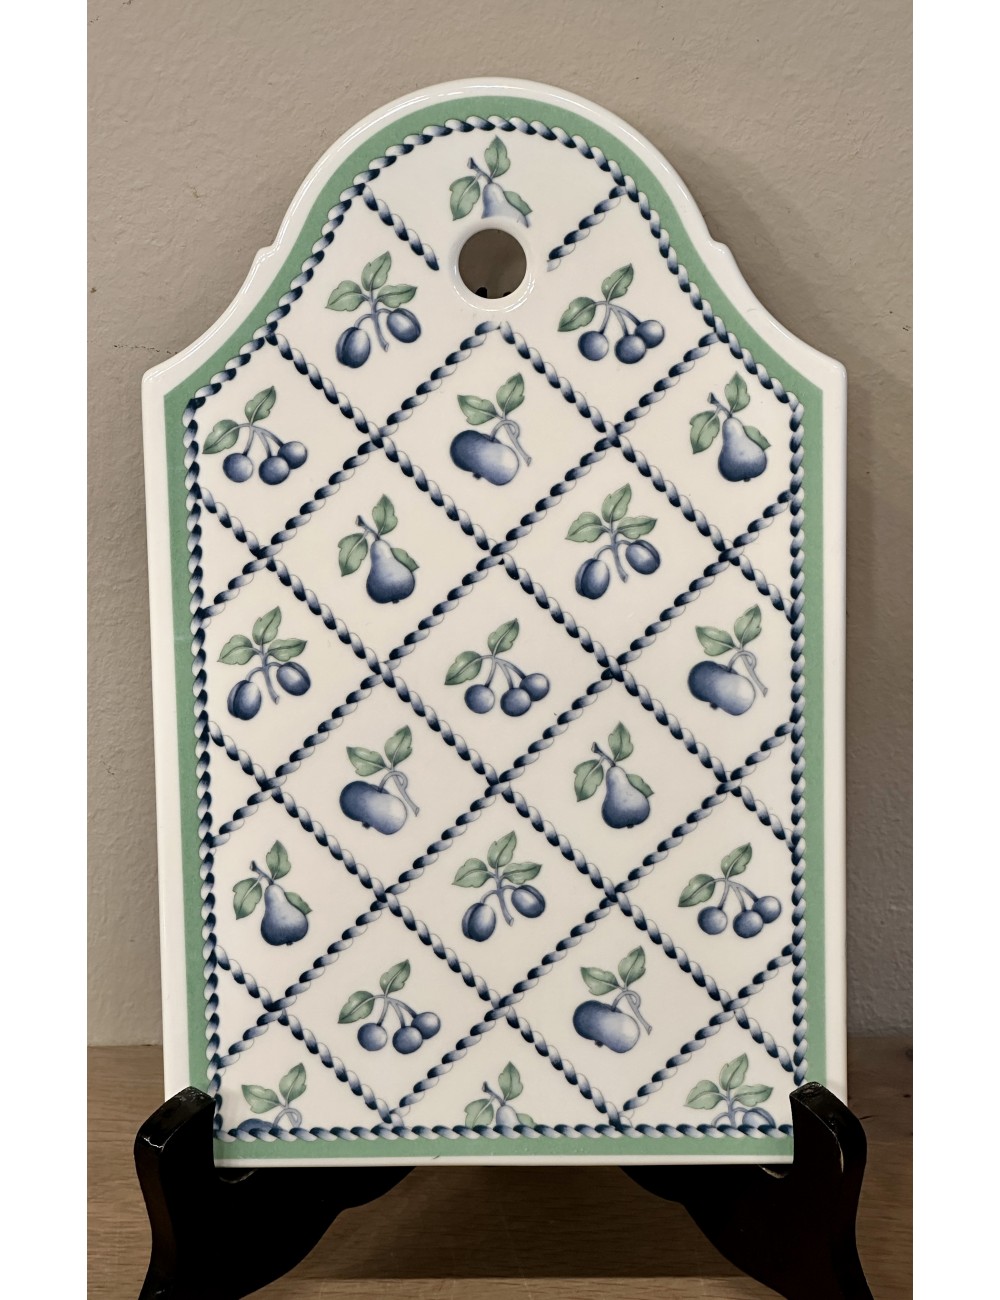 Sandwich board / Cutting board - Villeroy & Boch - décor PROVENCE executed with green and blue/purple fruit decorations